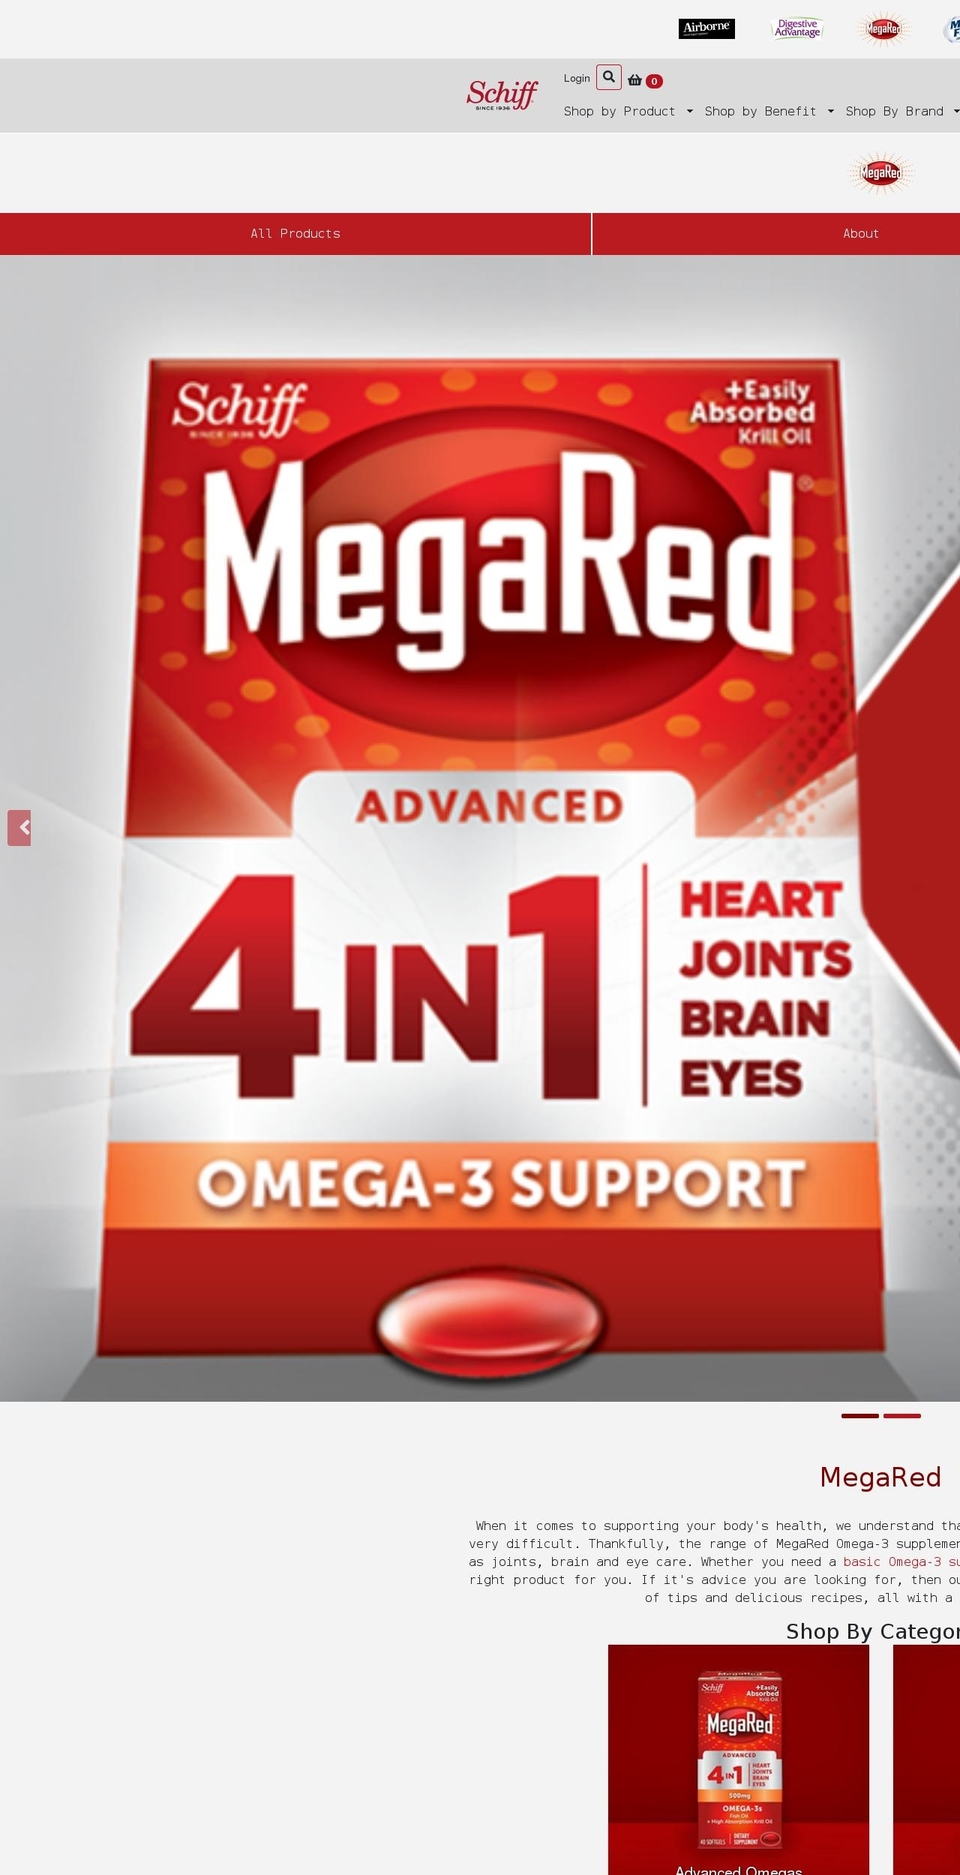 Schiff Vitamins - Updated 8\/3 Shopify theme site example mega-red-multi.com